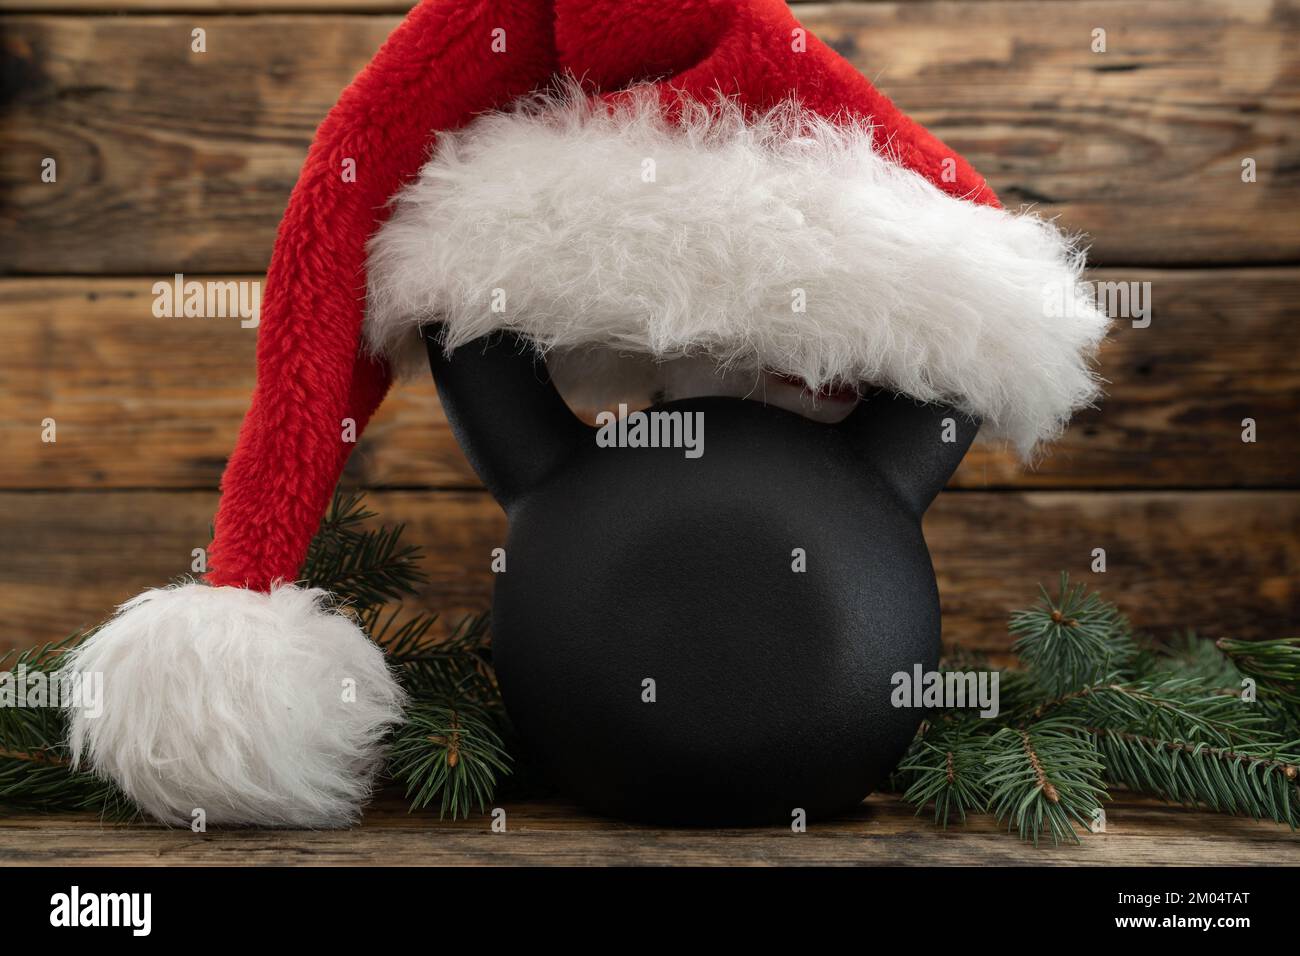 Gym kettlebell in red Santa Claus hat. Exercise equipment as Christmas gift idea. Fitness holiday season, winter workout composition. Stock Photo